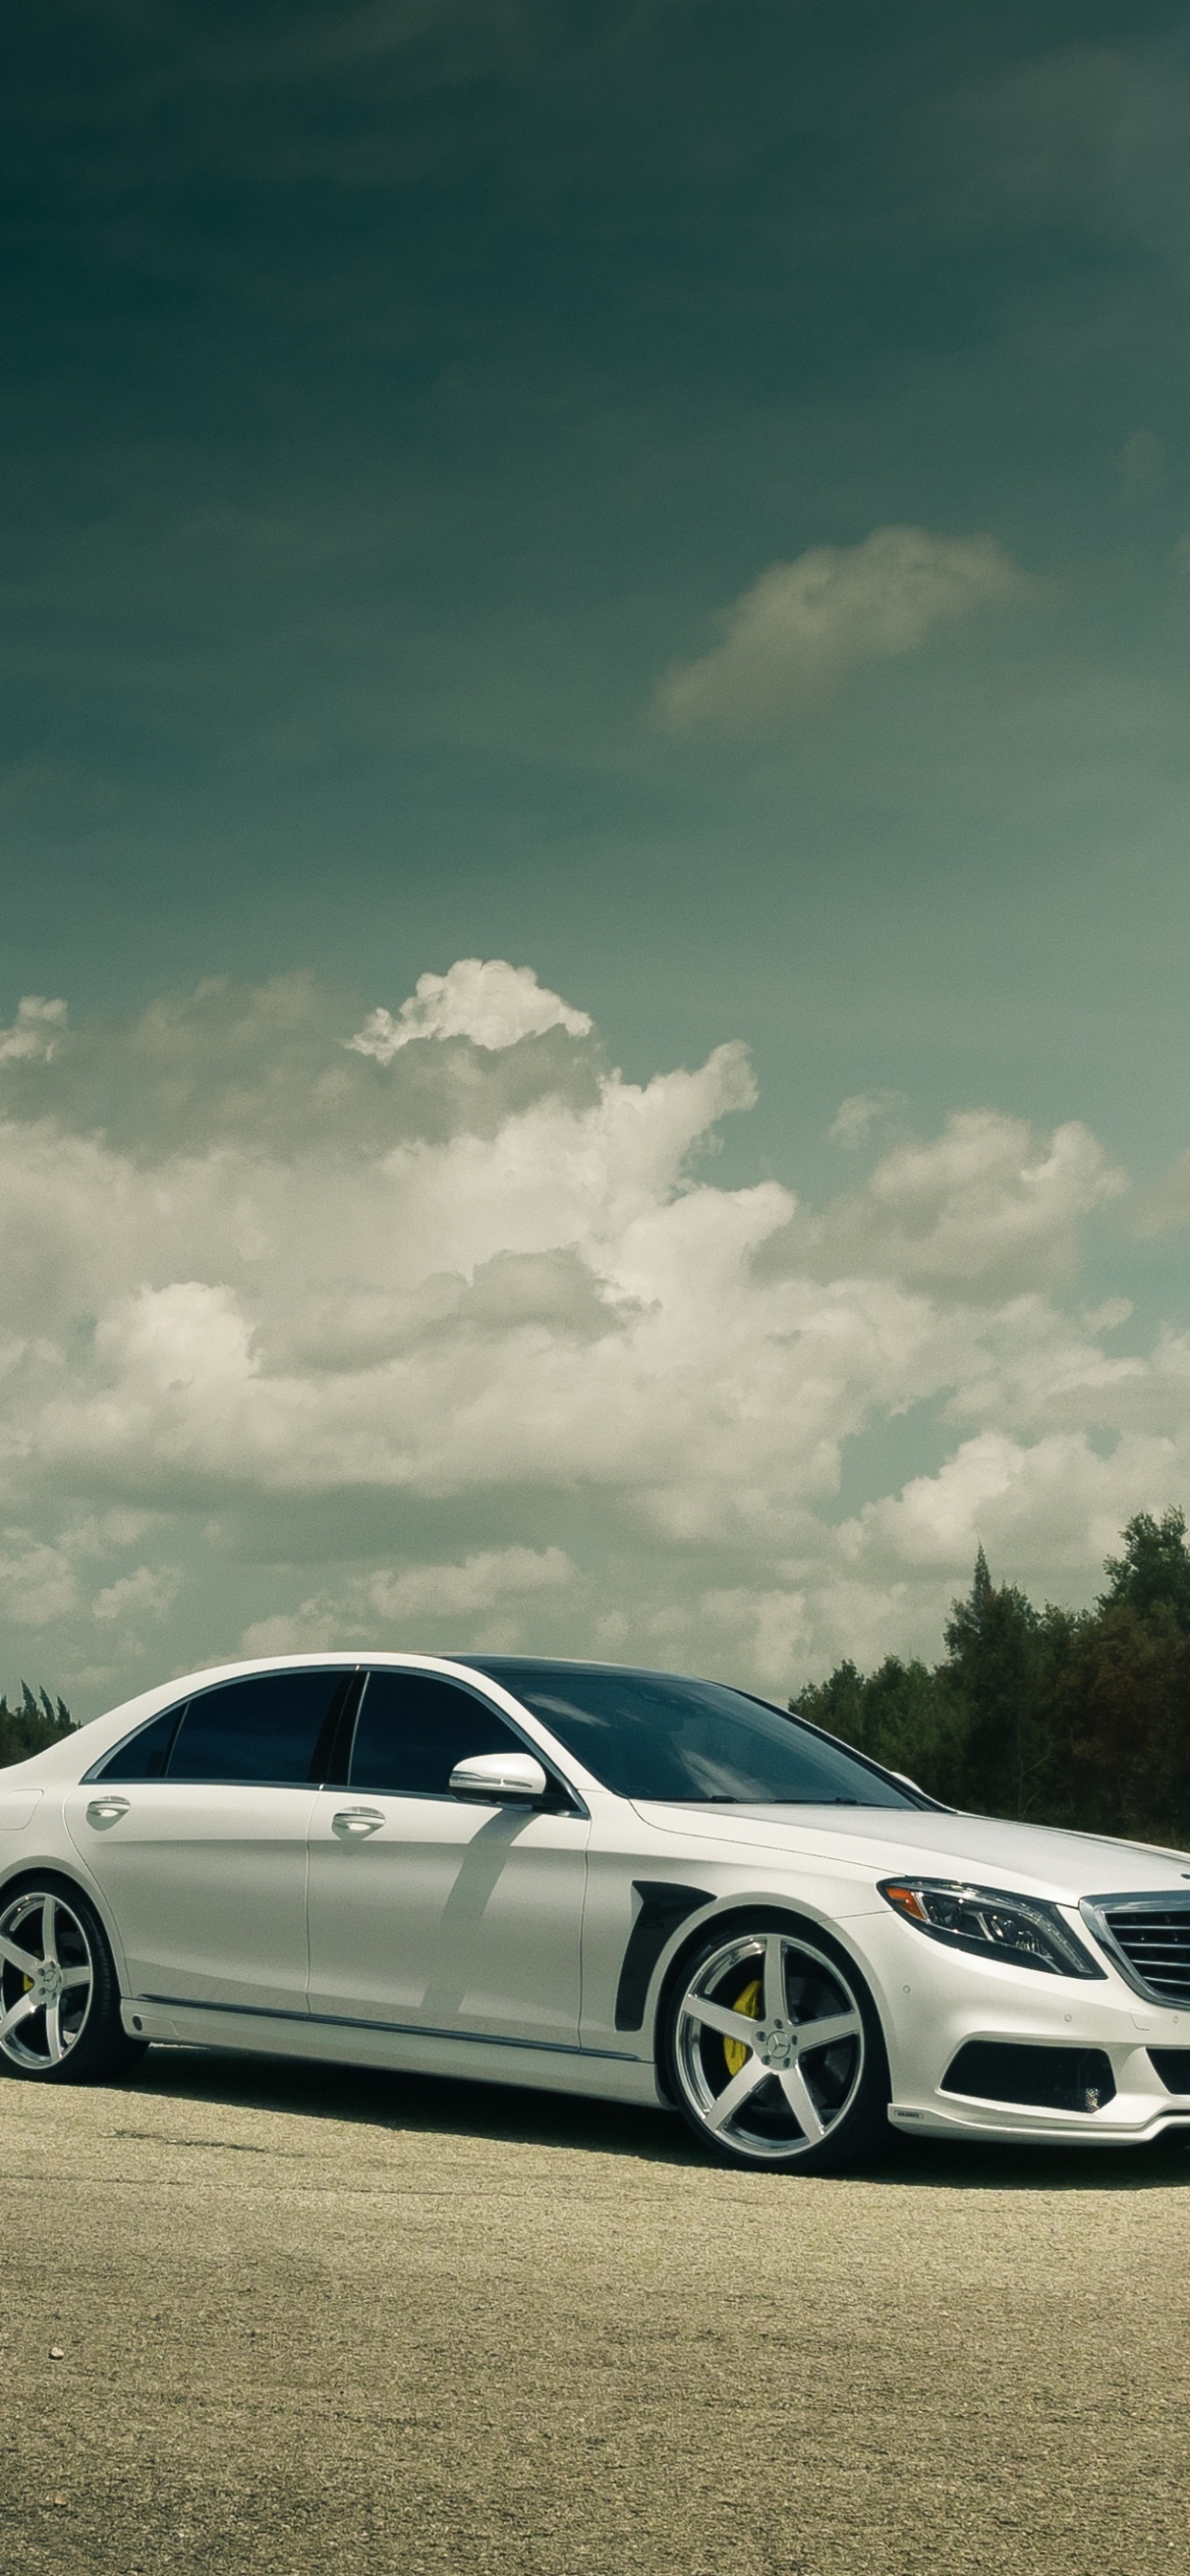 White Sedan on Gray Asphalt Road Under White Clouds and Blue Sky During Daytime. Wallpaper in 1242x2688 Resolution